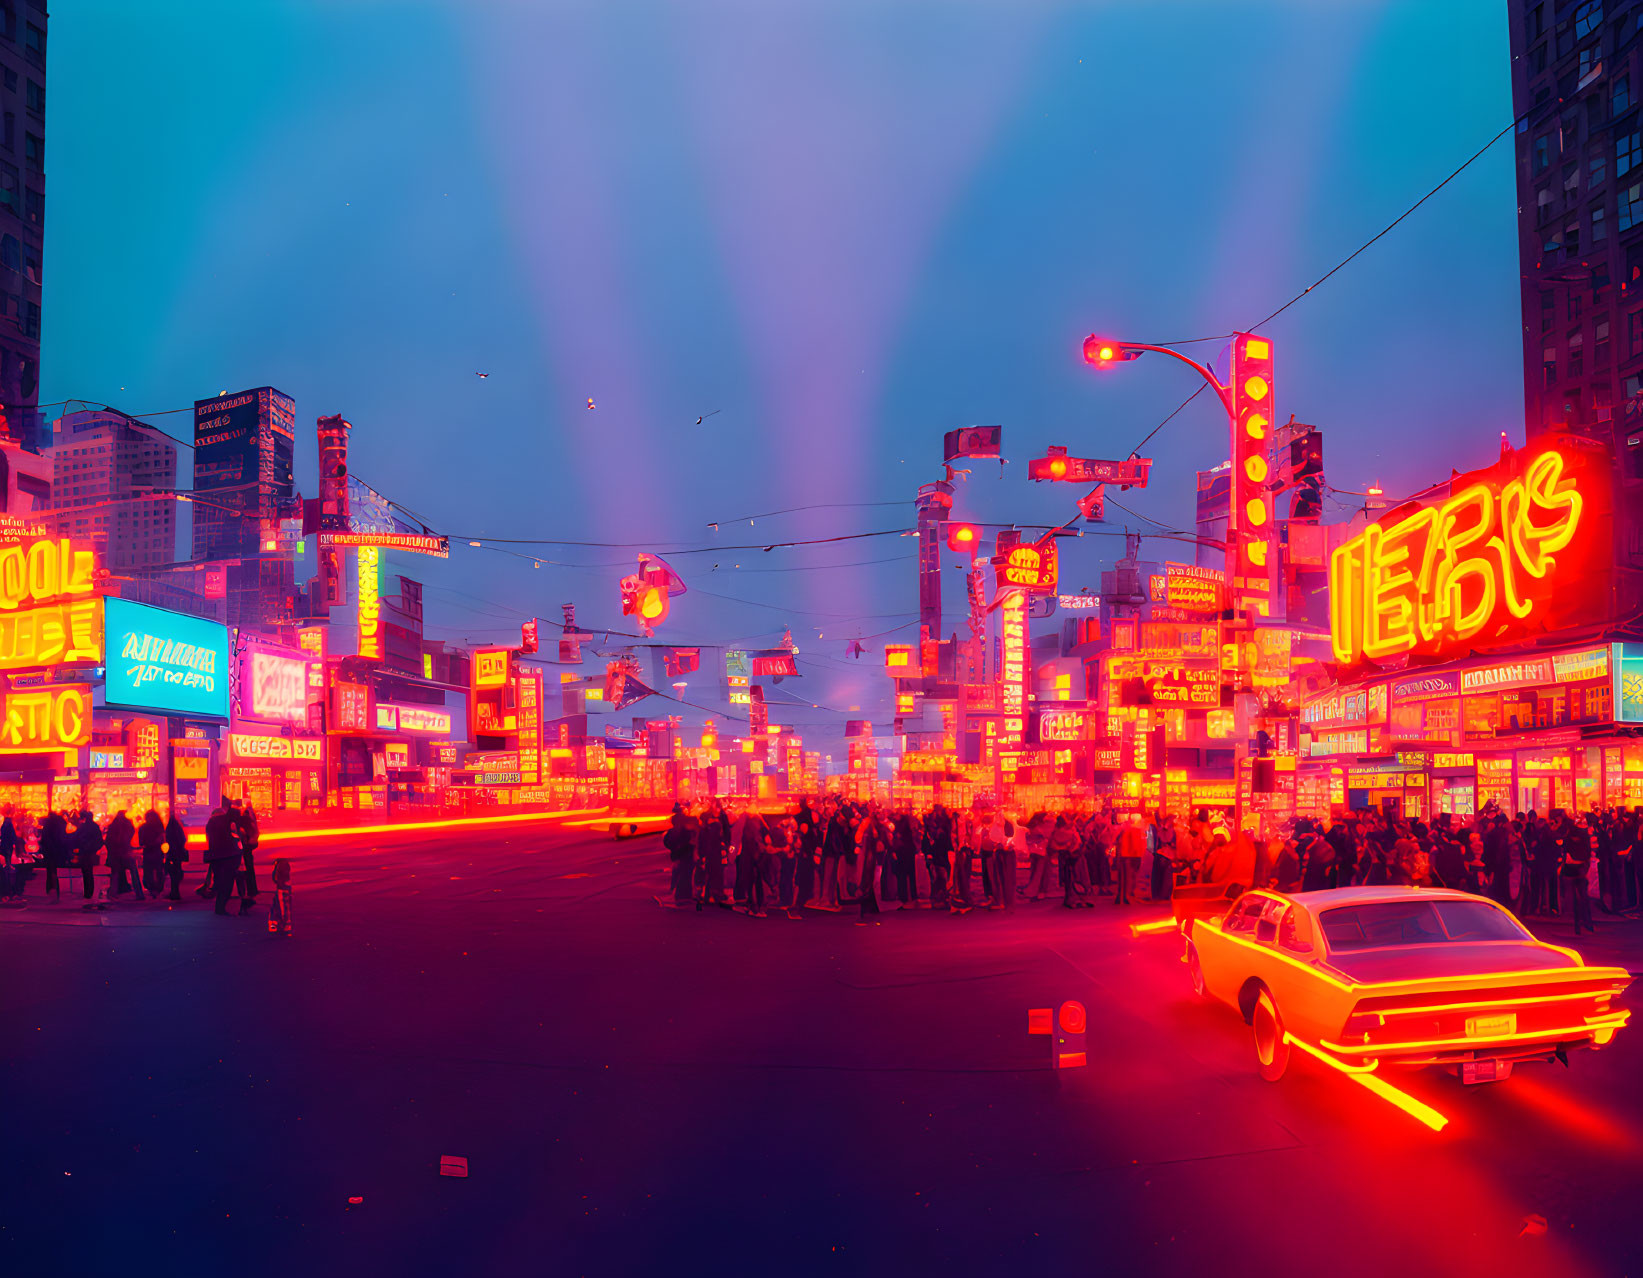 Vibrant neon-lit cityscape at twilight with classic car and bustling crowd